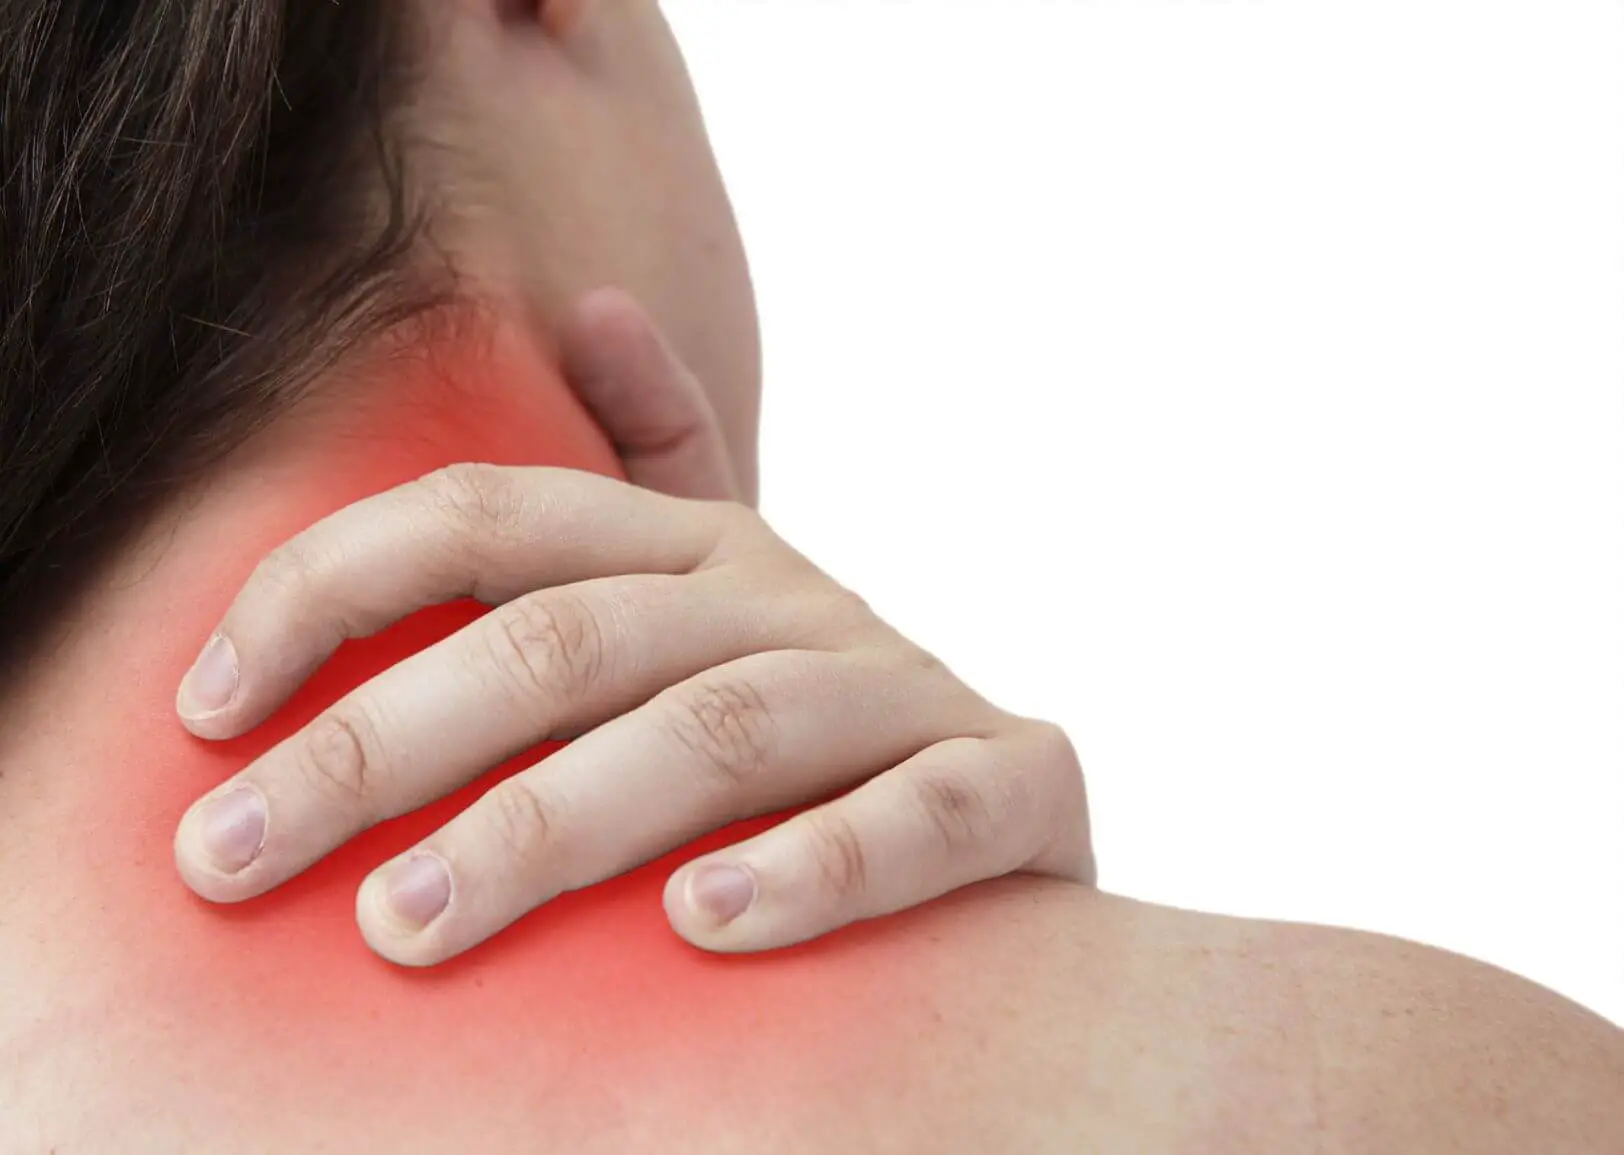 4 Simple Ways To Control Pinched Nerves In The Neck